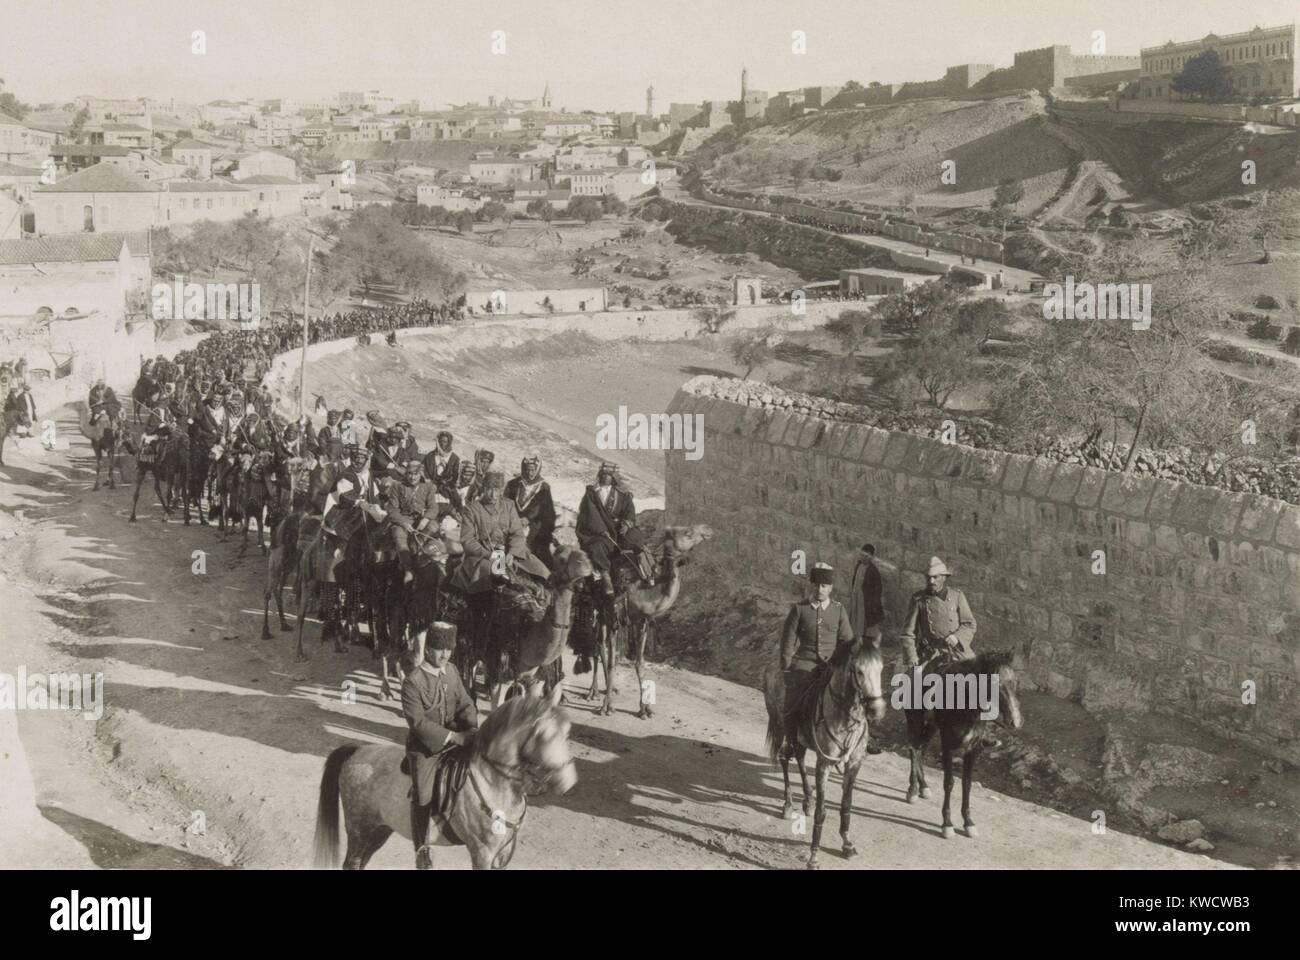 World War 1 in the Middle East. Volunteer Arab Camel Corps from South Arabia fighting with Turkish forces leaving Jerusalem for the battle front in Palestine. 1916. (BSLOC 2013 1 54) Stock Photo